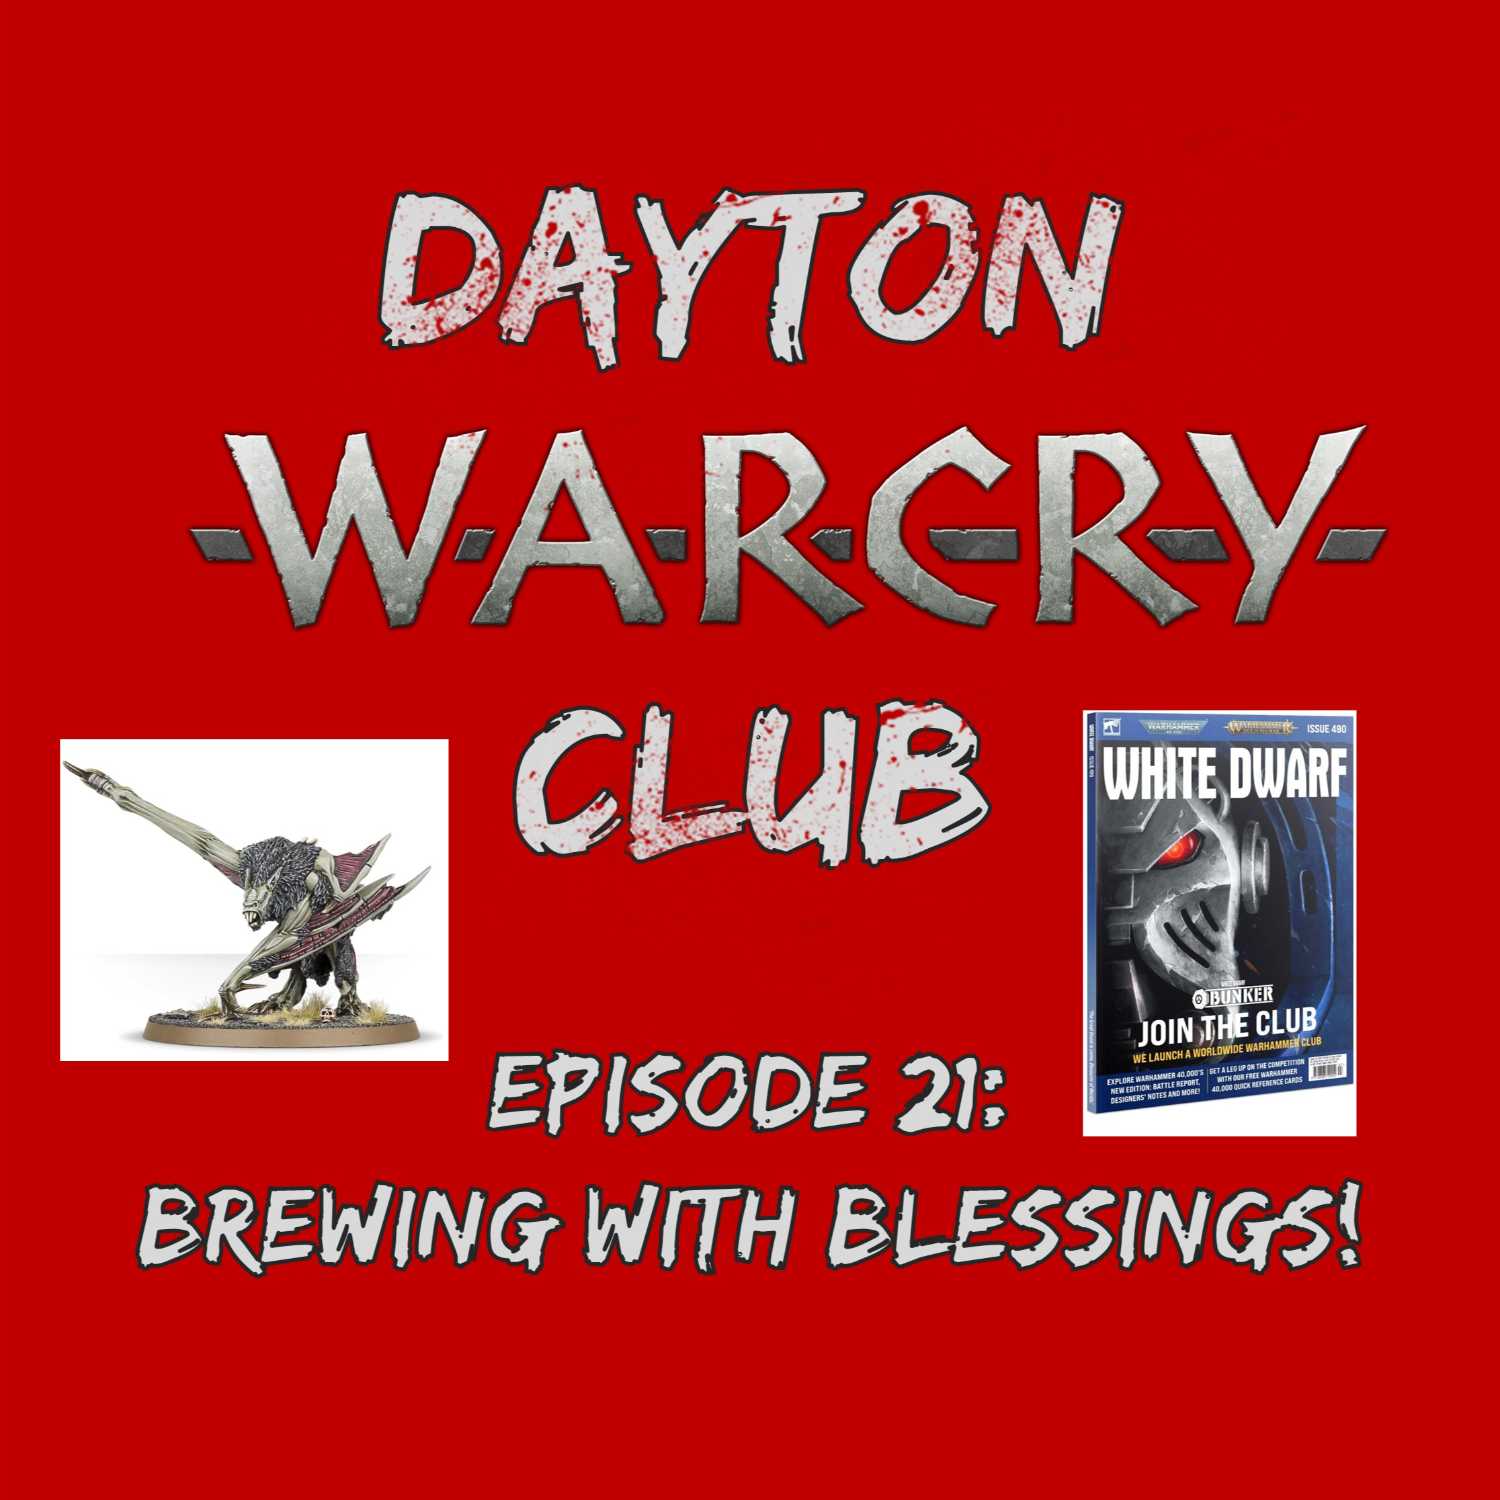 Dayton Warcry Club Episode 21: Brewing with Blessings!